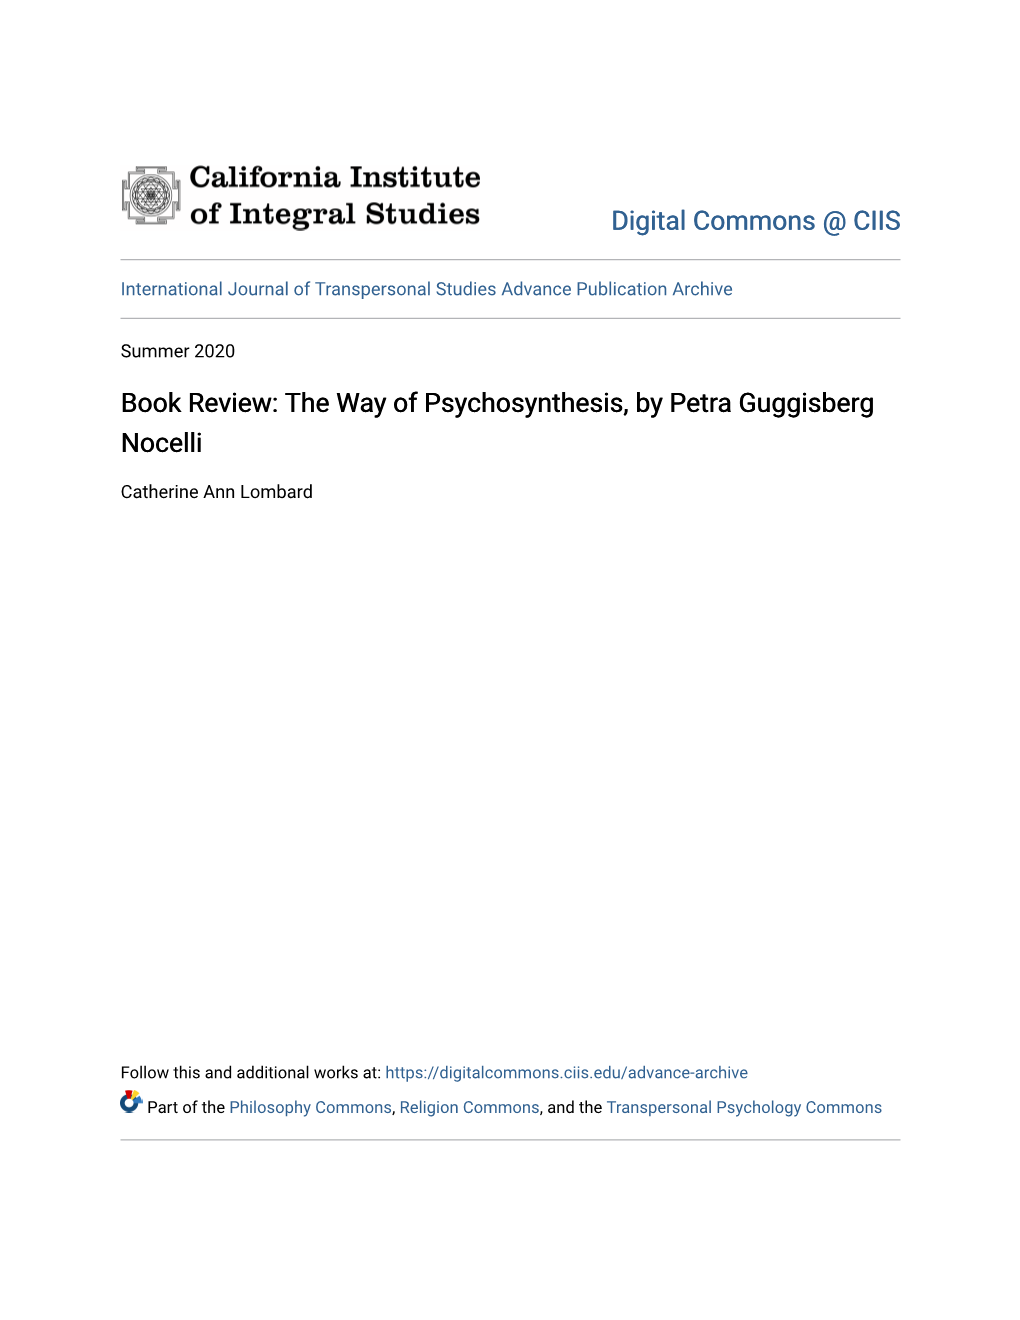 The Way of Psychosynthesis, by Petra Guggisberg Nocelli